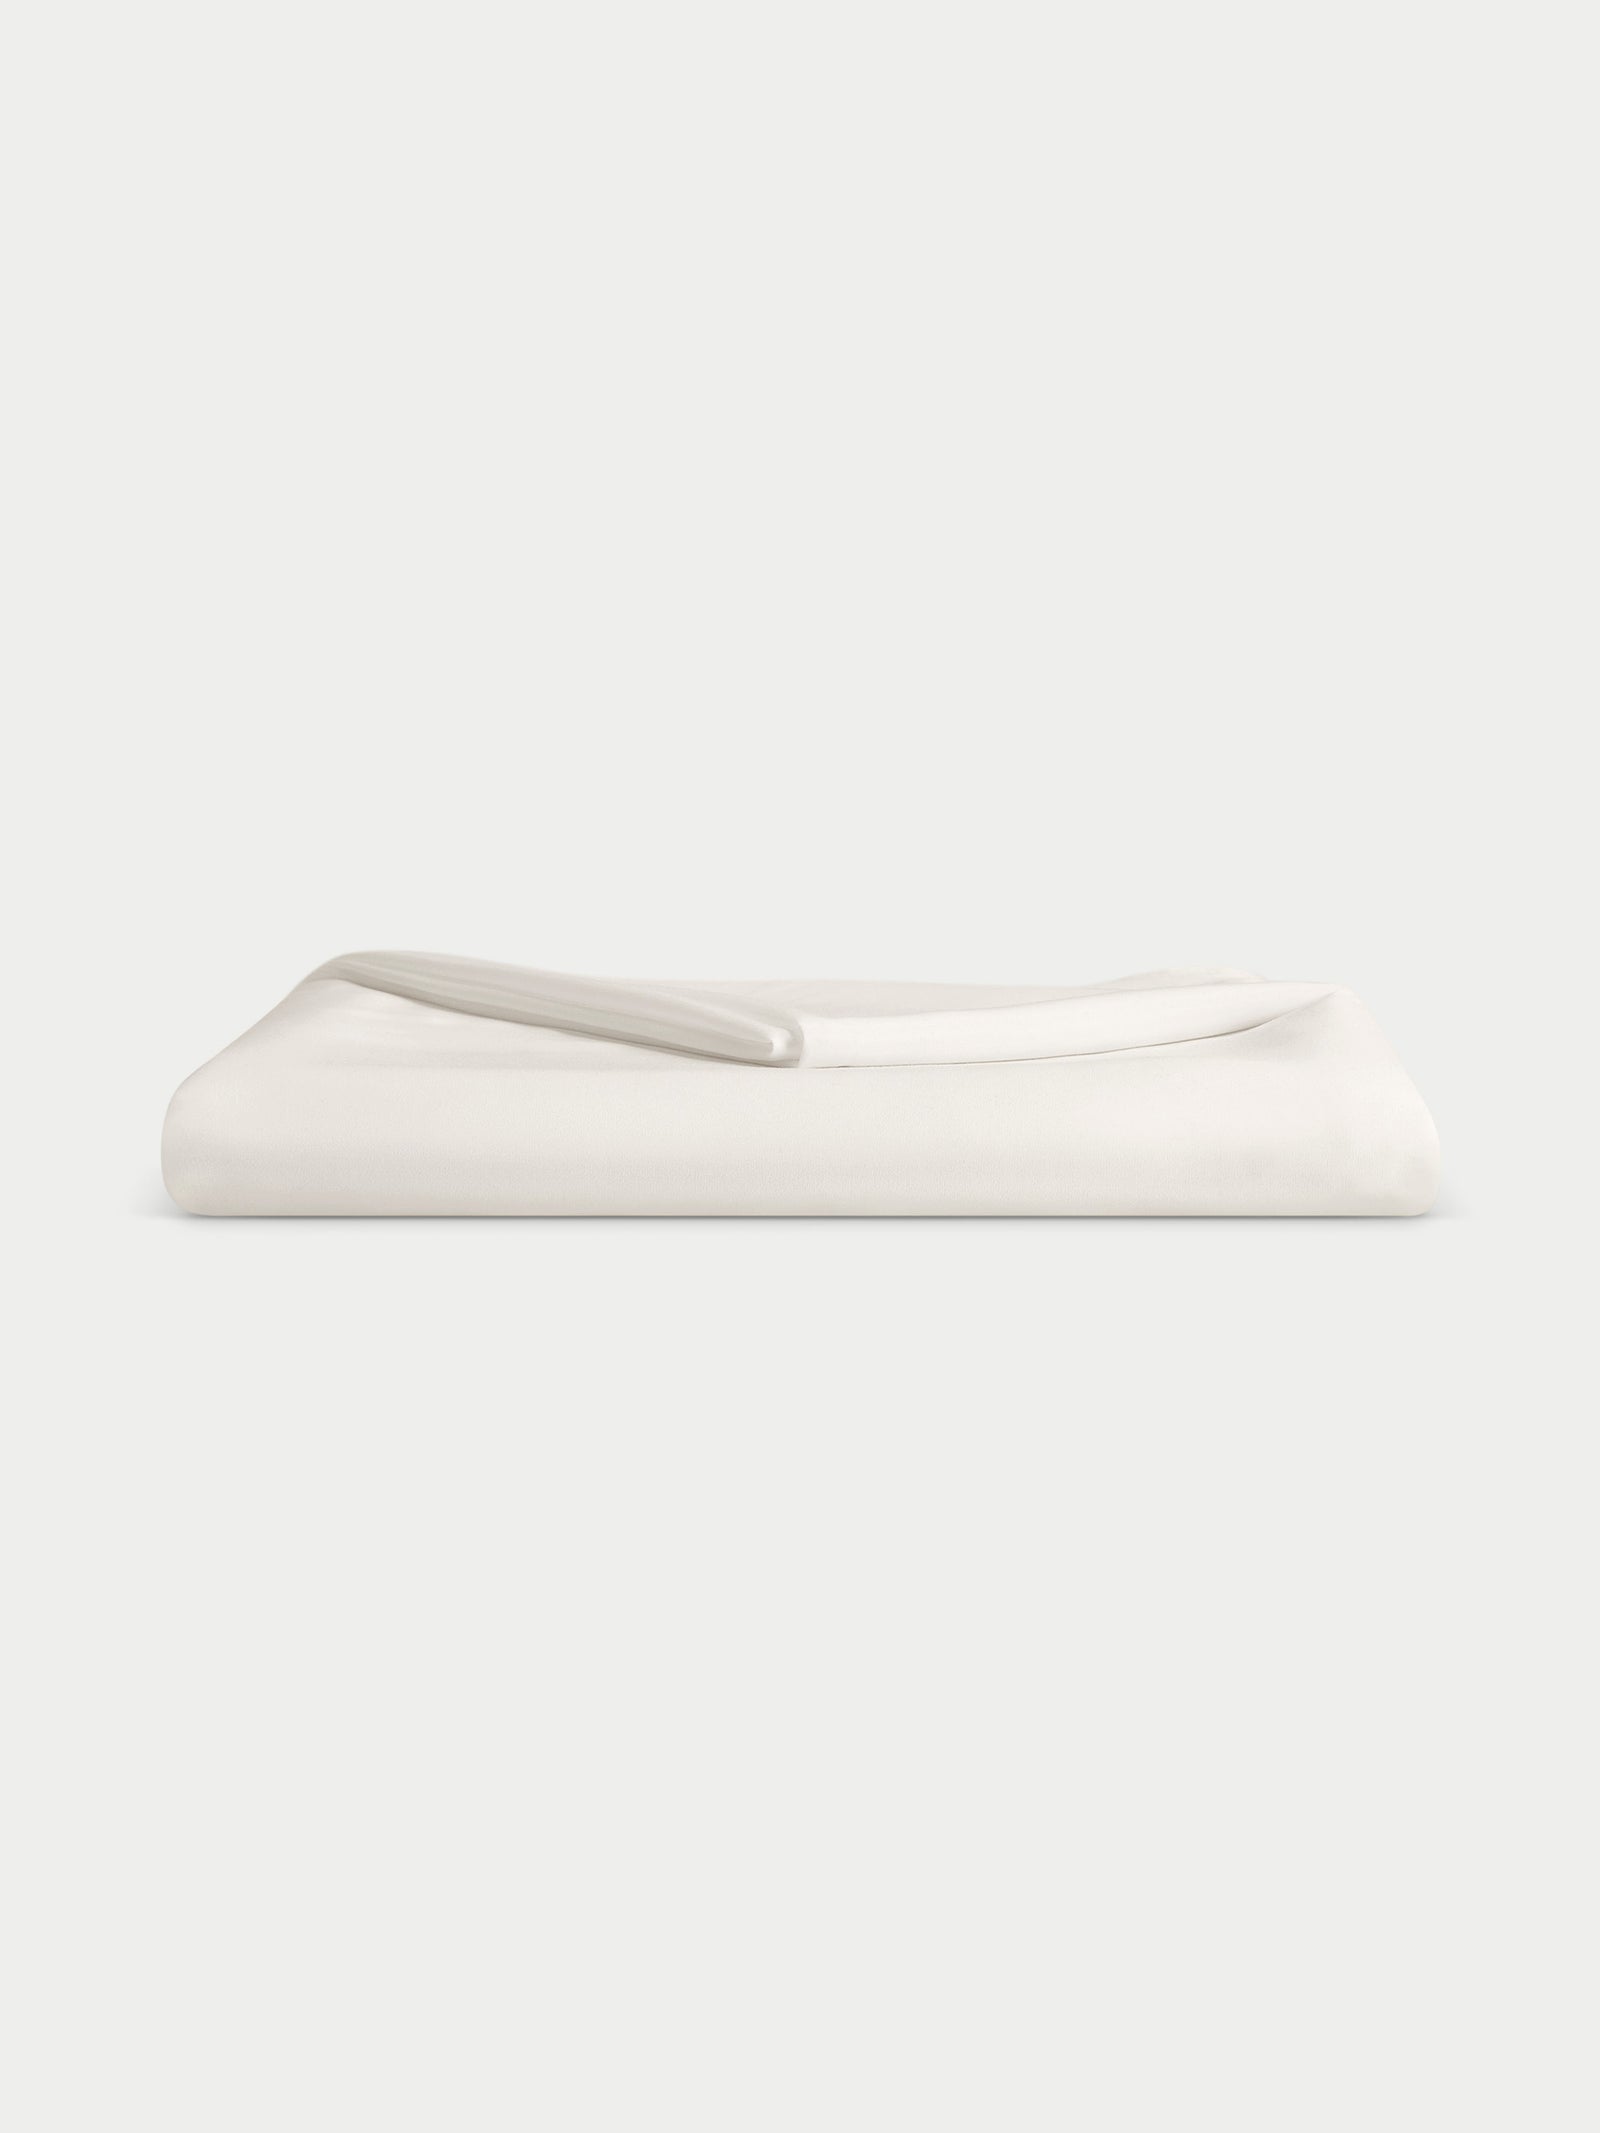 Creme top sheet folded with white background 